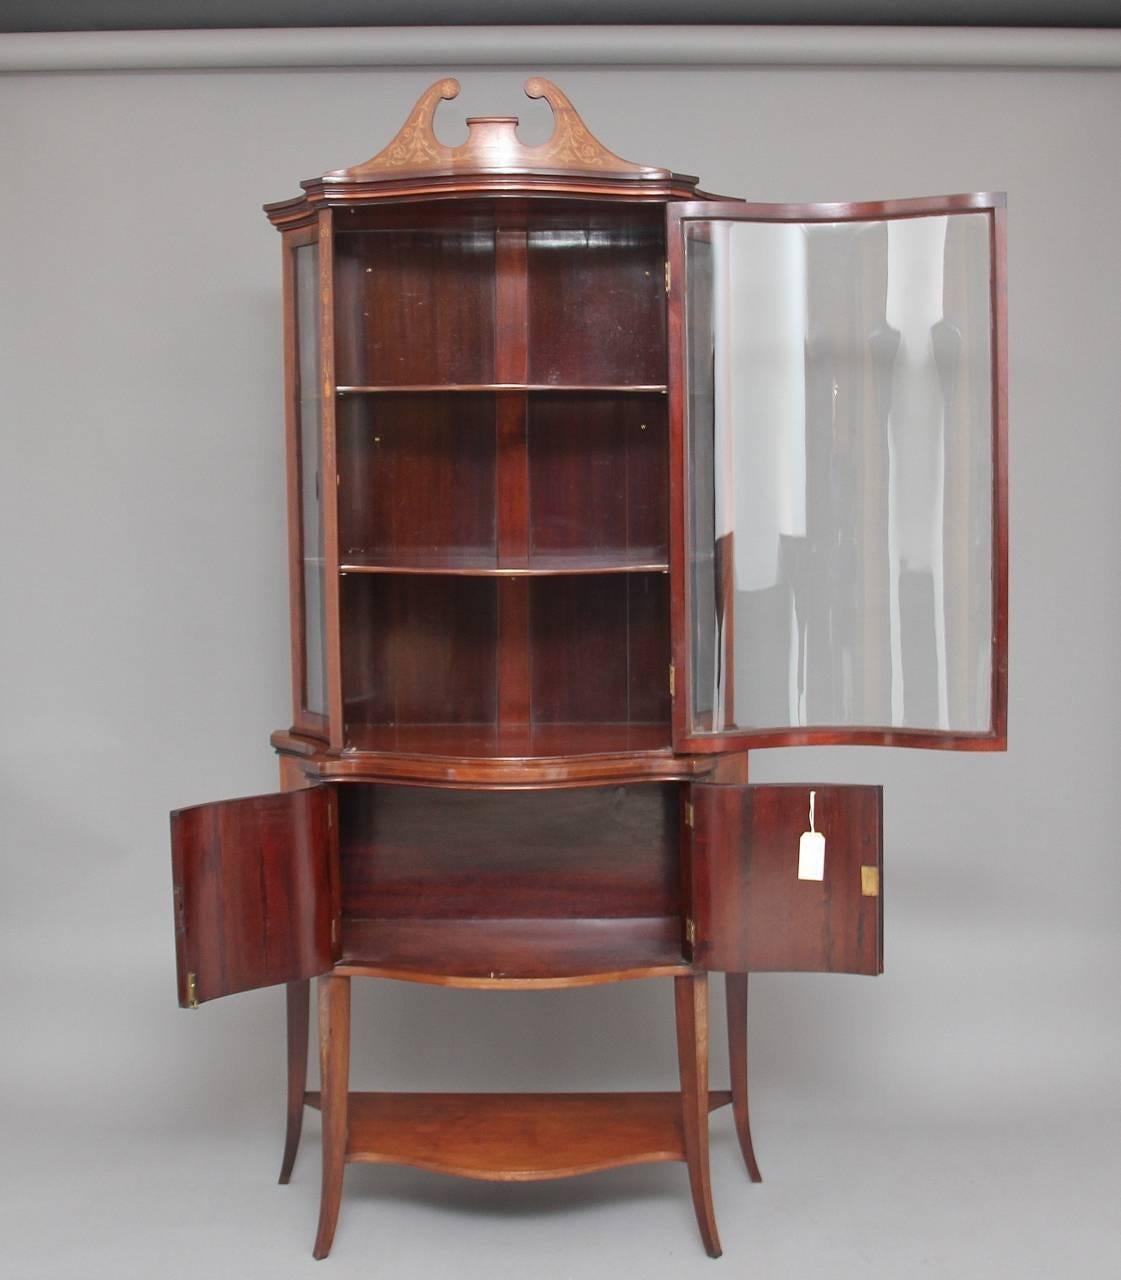 19th century mahogany Sheraton revival inlaid display cabinet possibly by Edwards & Roberts, profusely inlaid all over with floral marquetry, the inlaid broken arch pediment sitting in a moulded edge frieze, with a serpentine shaped single glazed